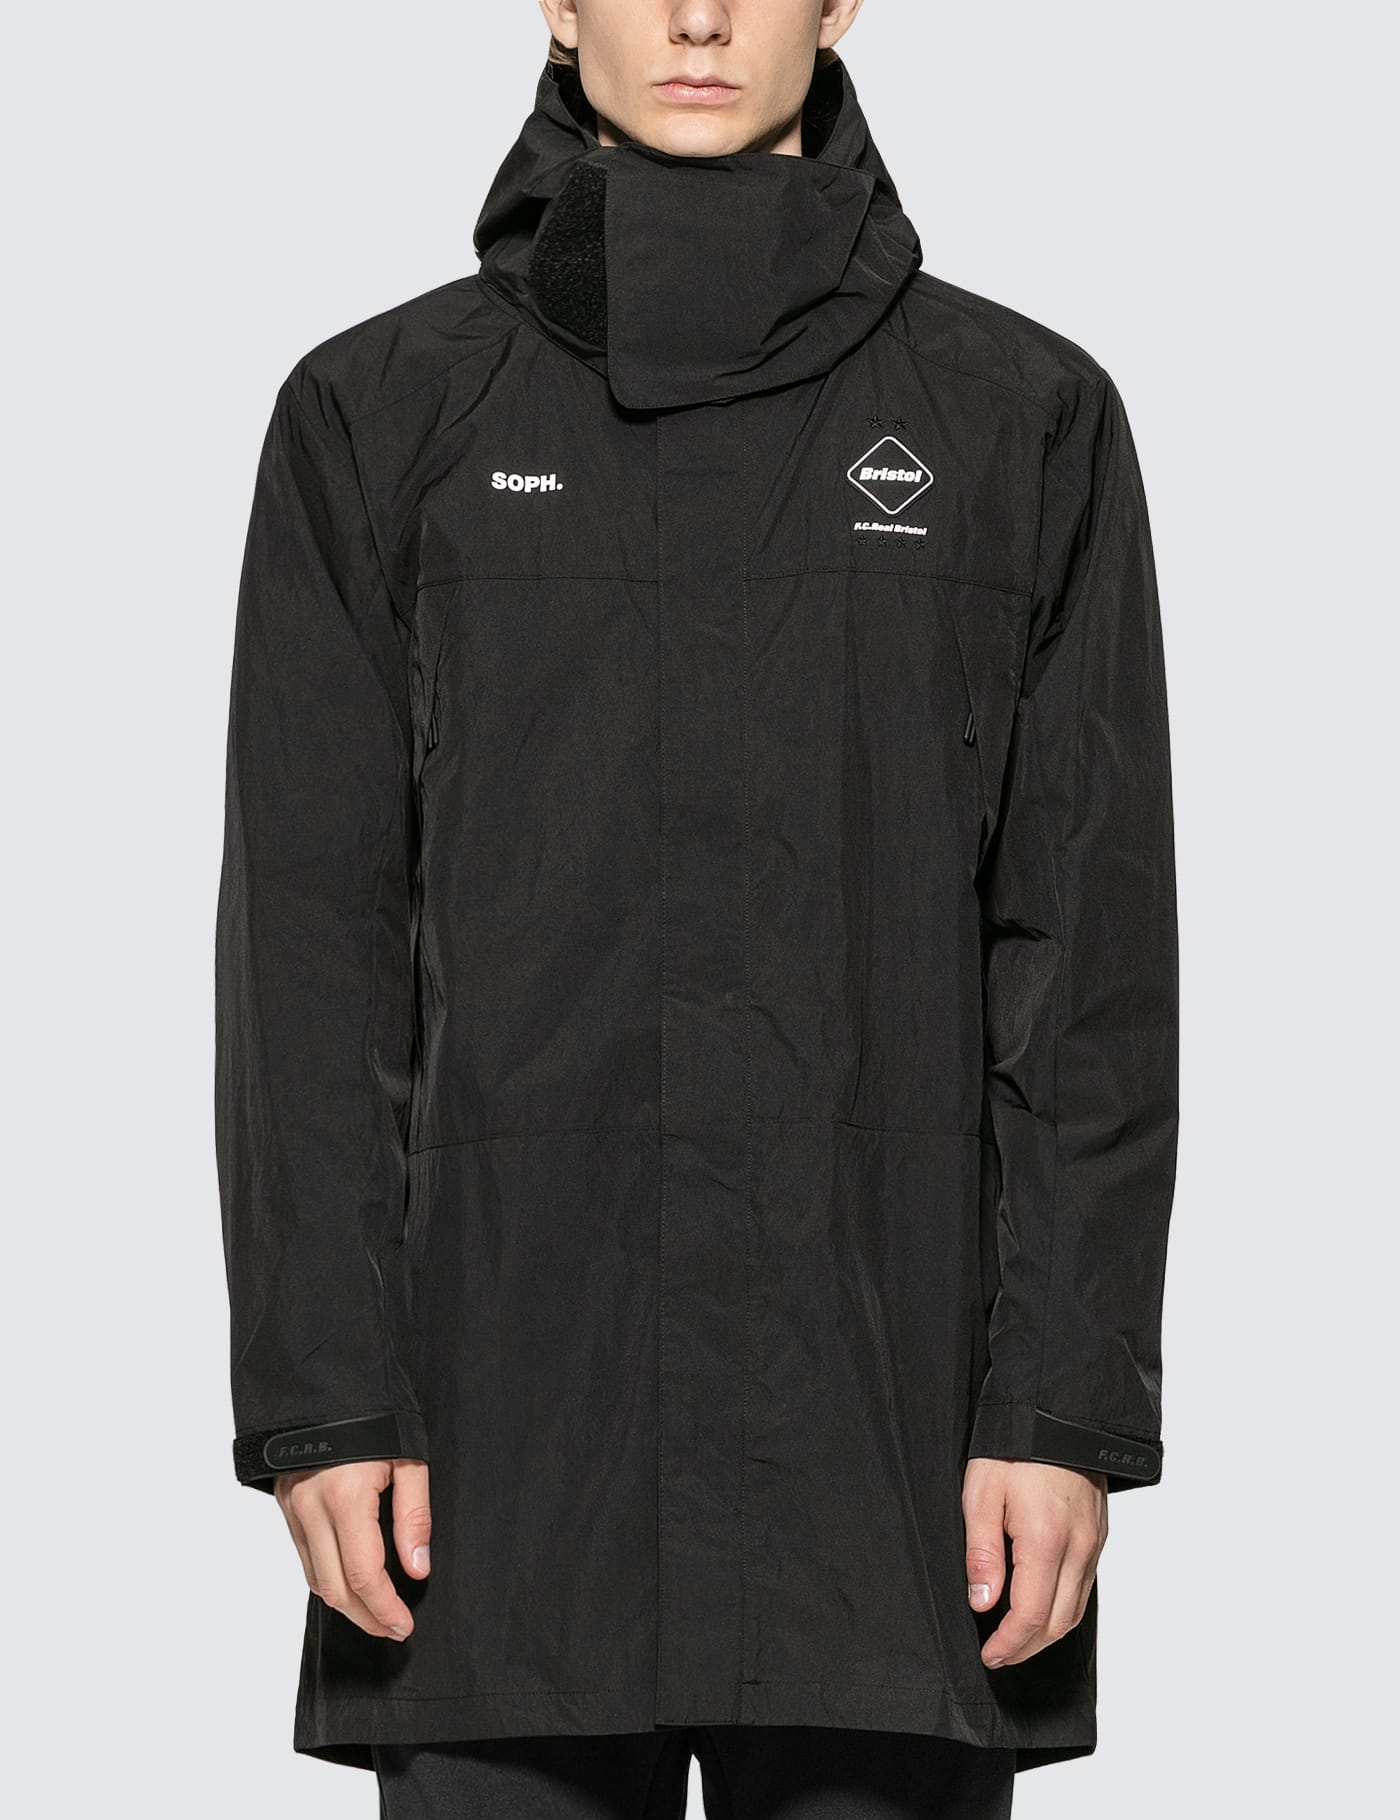 F.C. Real Bristol - Tour Bench Coat | HBX - Globally Curated